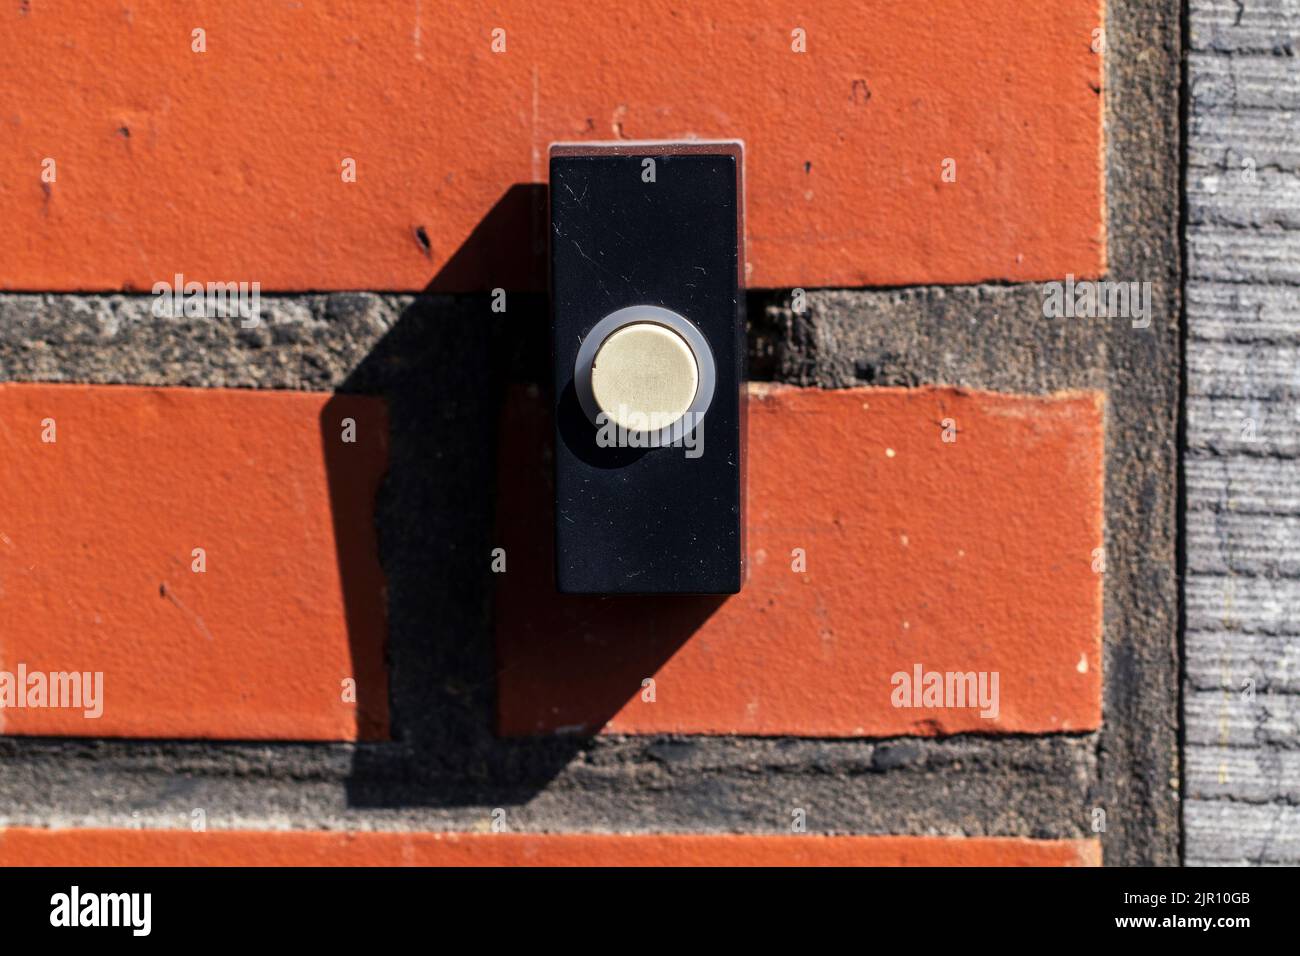 A close up portrait of an old black doorbell with a white button on a red brick wall, ready to be pressed to ring the bell and notify the residents. Stock Photo